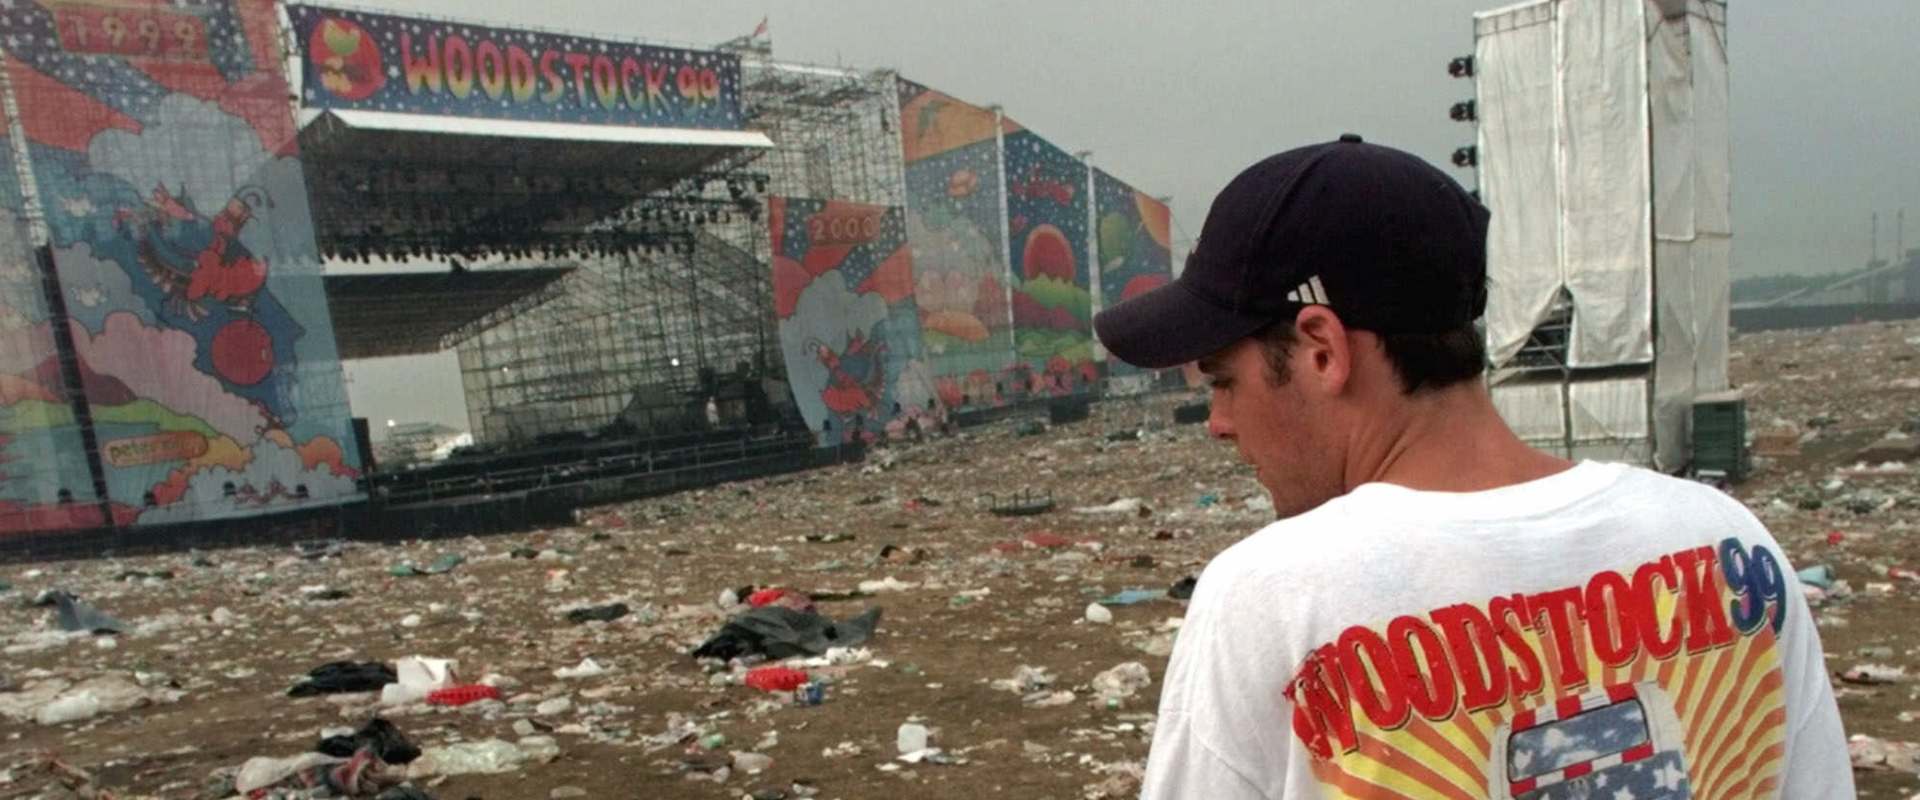 Woodstock 99: Peace, Love, and Rage background 2